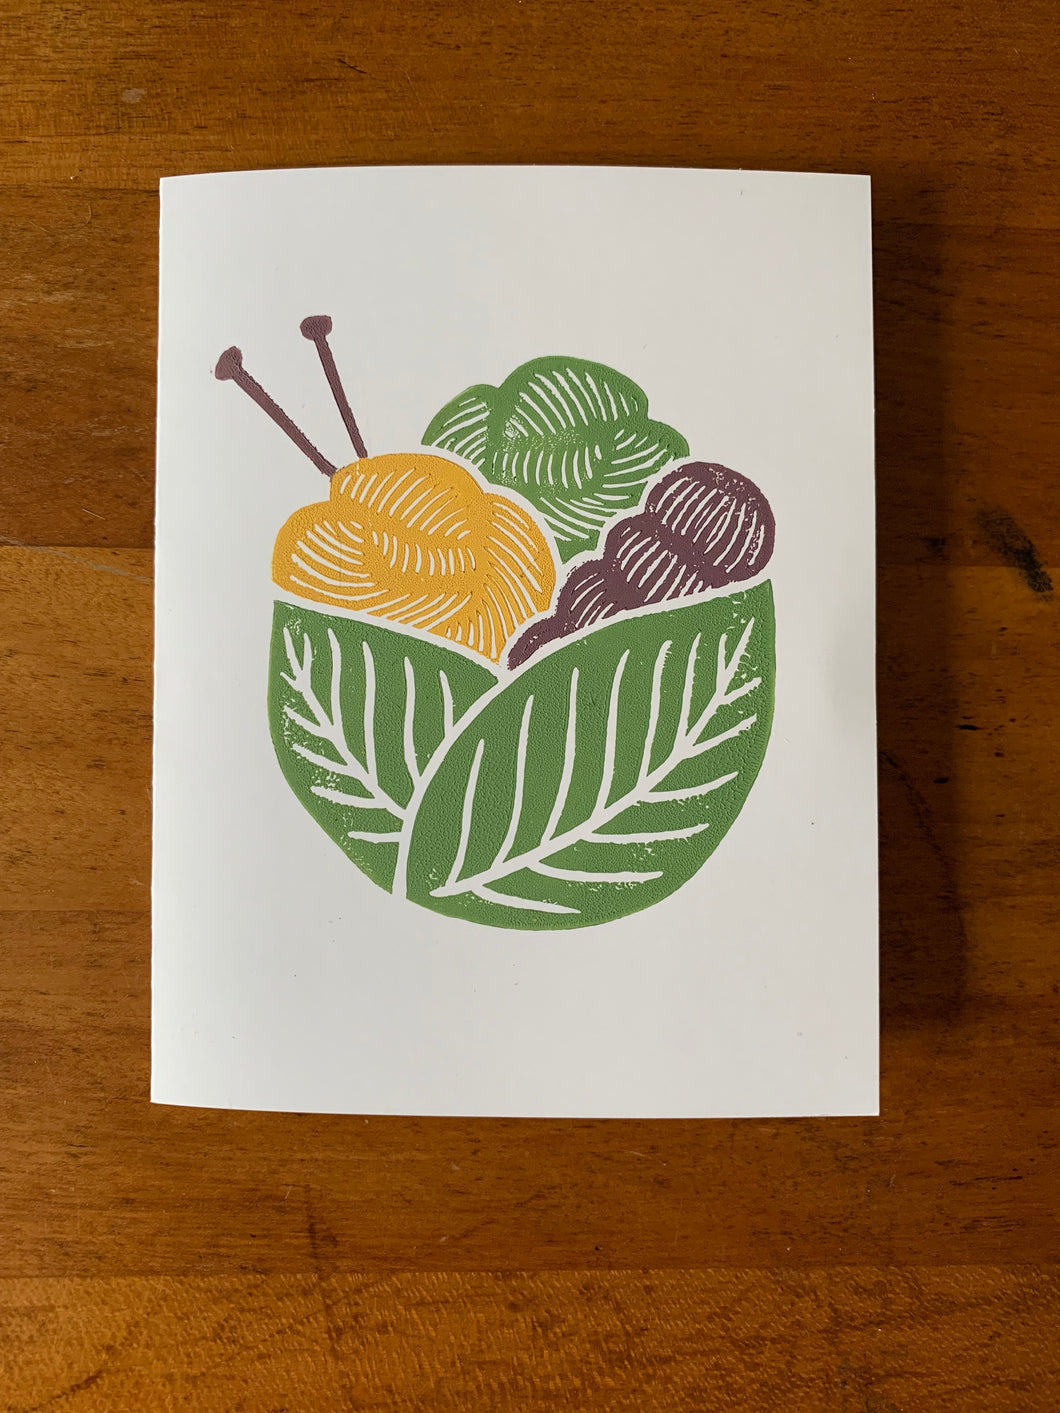 A card with a linocut design depicting a green basket made of two leaves, holding a pair of purple knitting needles and three skeins of yarn in yellow, purple and green.